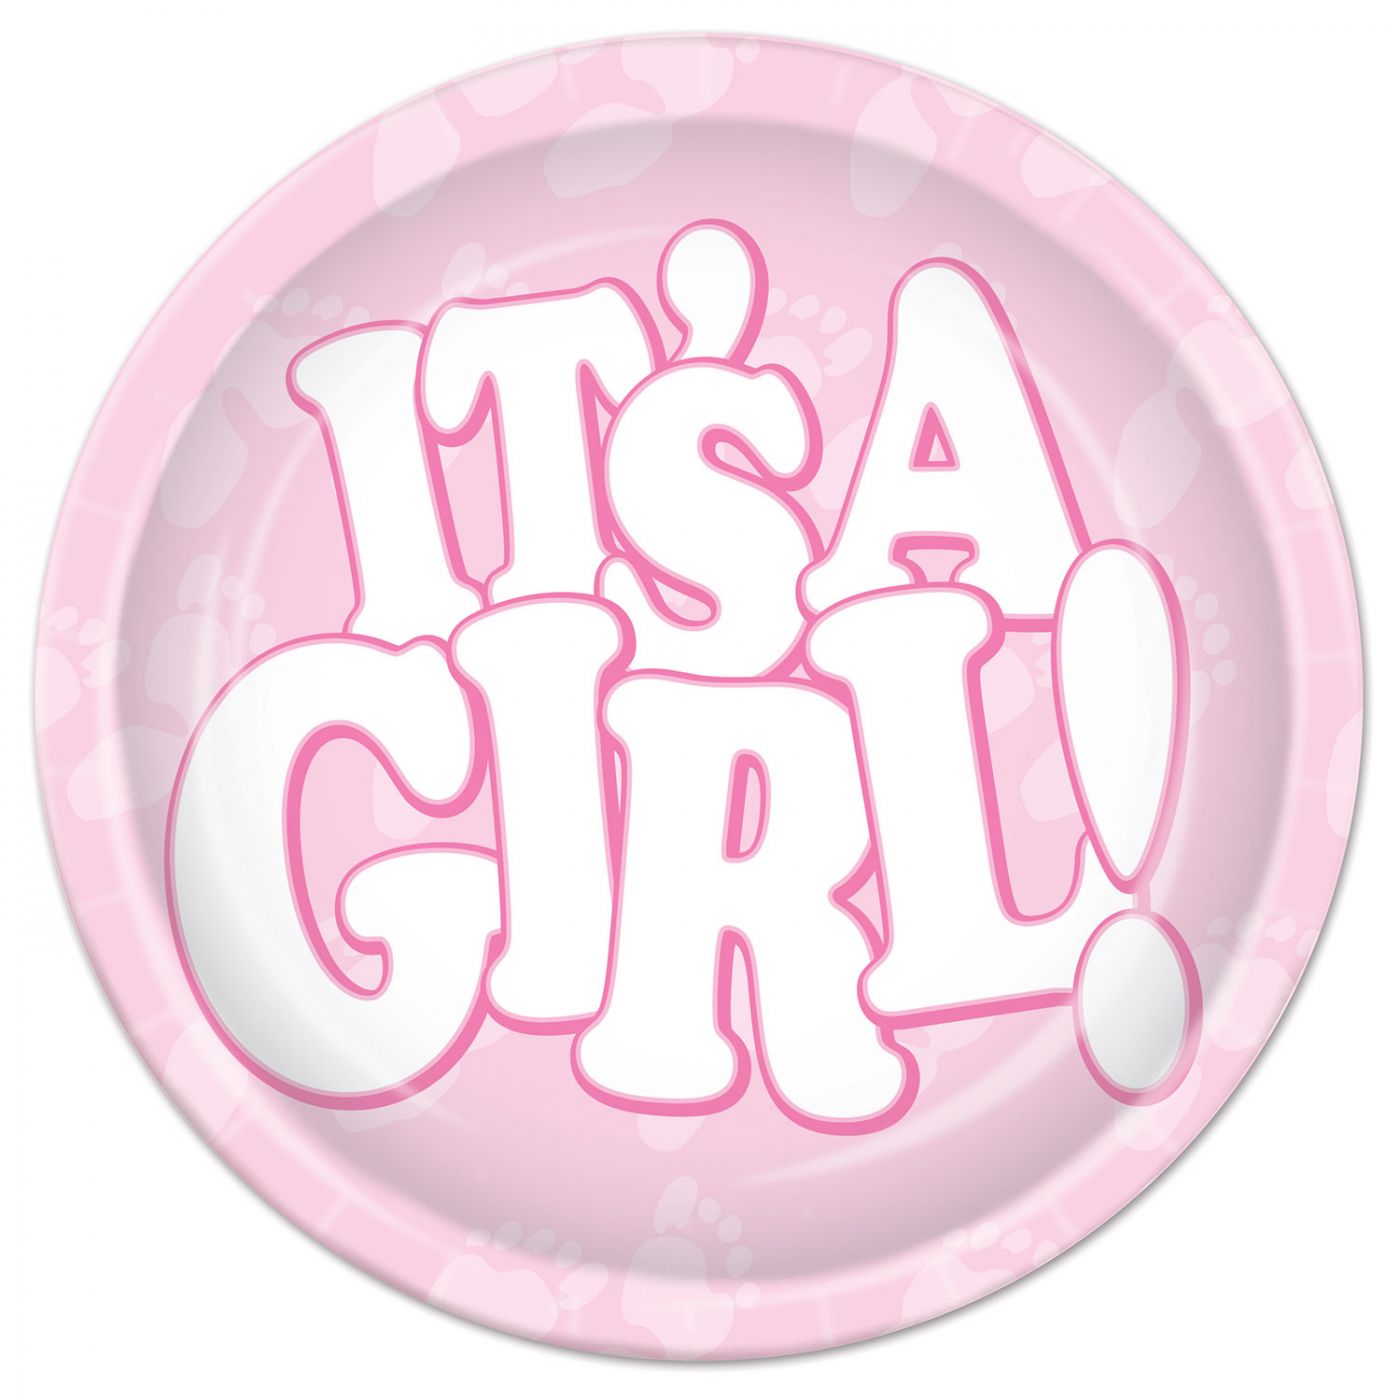 It's A Girl! Plates (12) image